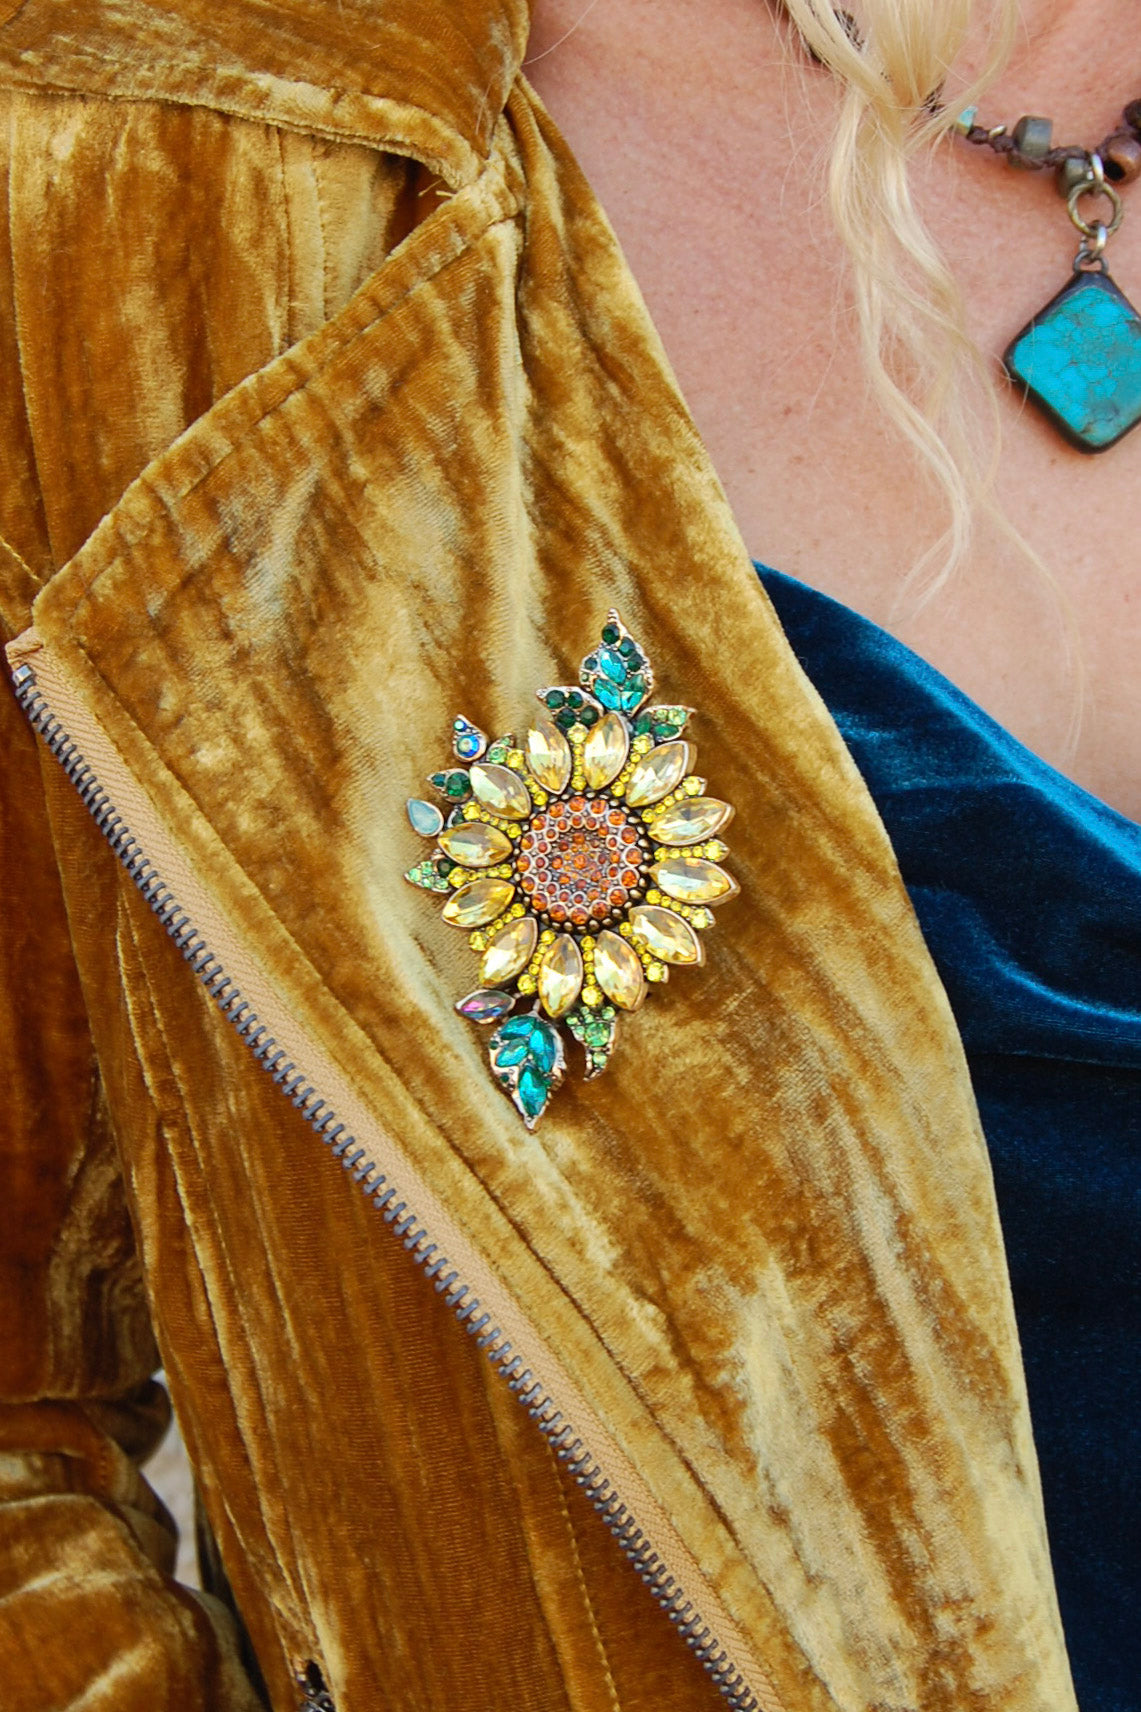 The Sunflower Bedazzled Brooch - SpiritedBoutiques Boho Hippie Boutique Style Brooch, Metal Gallery